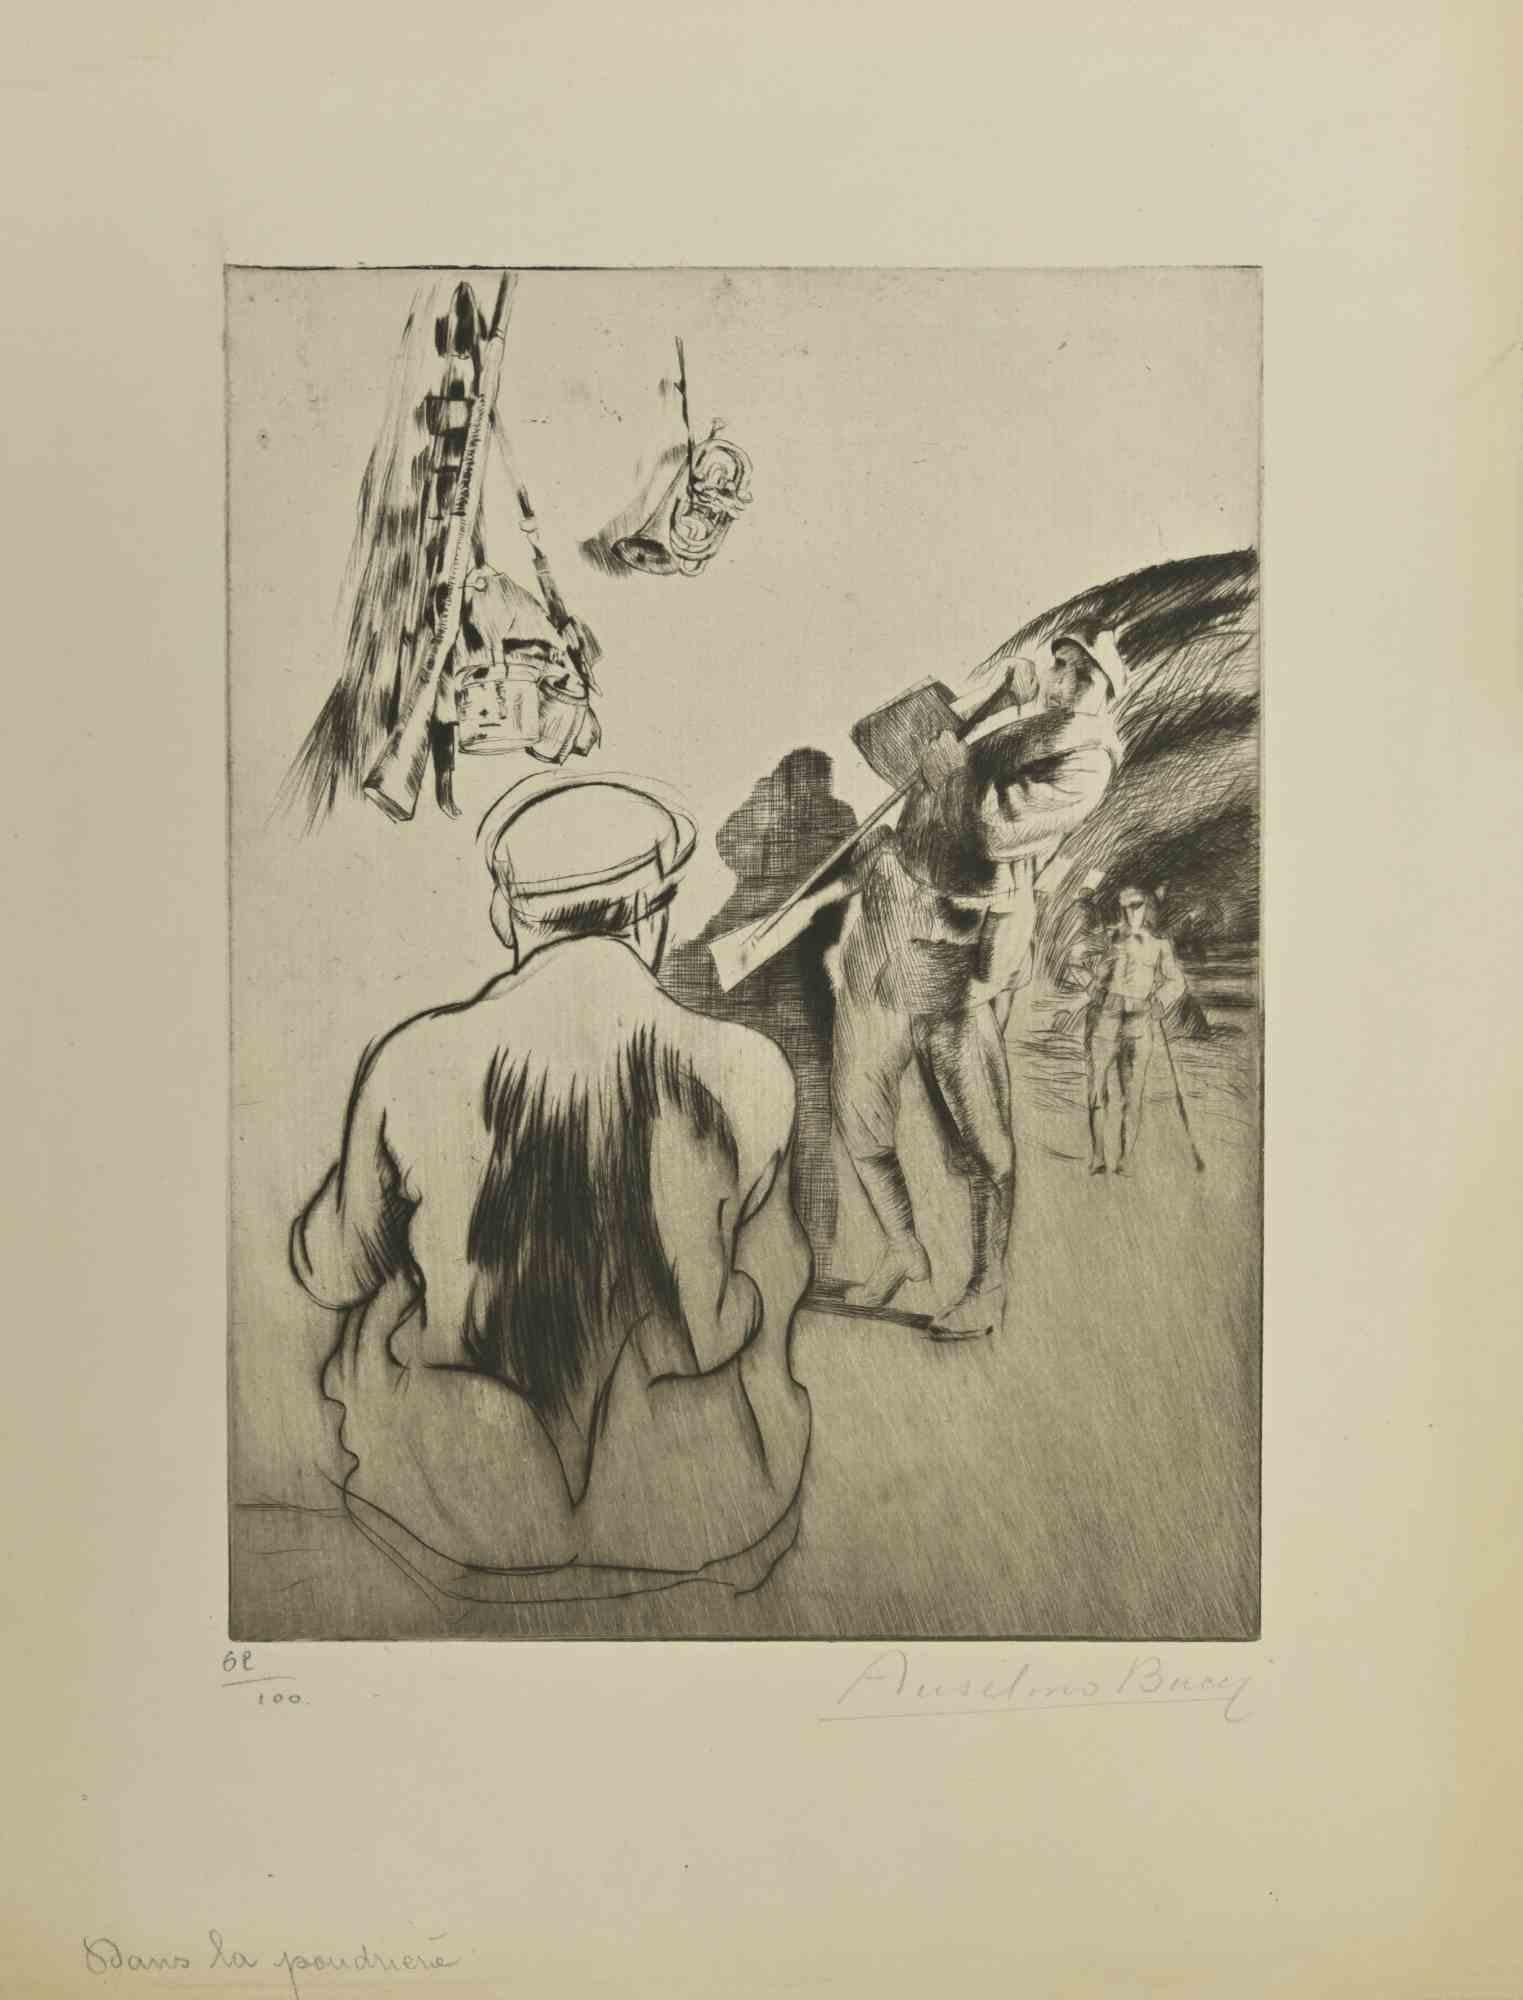  Dans la Poudrière - from "Le Croquis du Front Italien" is an Etching and Drypoint realized by the Italian Artist Anselmo Bucci, in 1917.

Hand signed on the right margin . Edition n. 68/100 specimens on Hollande paper. From the collection: “Croquis